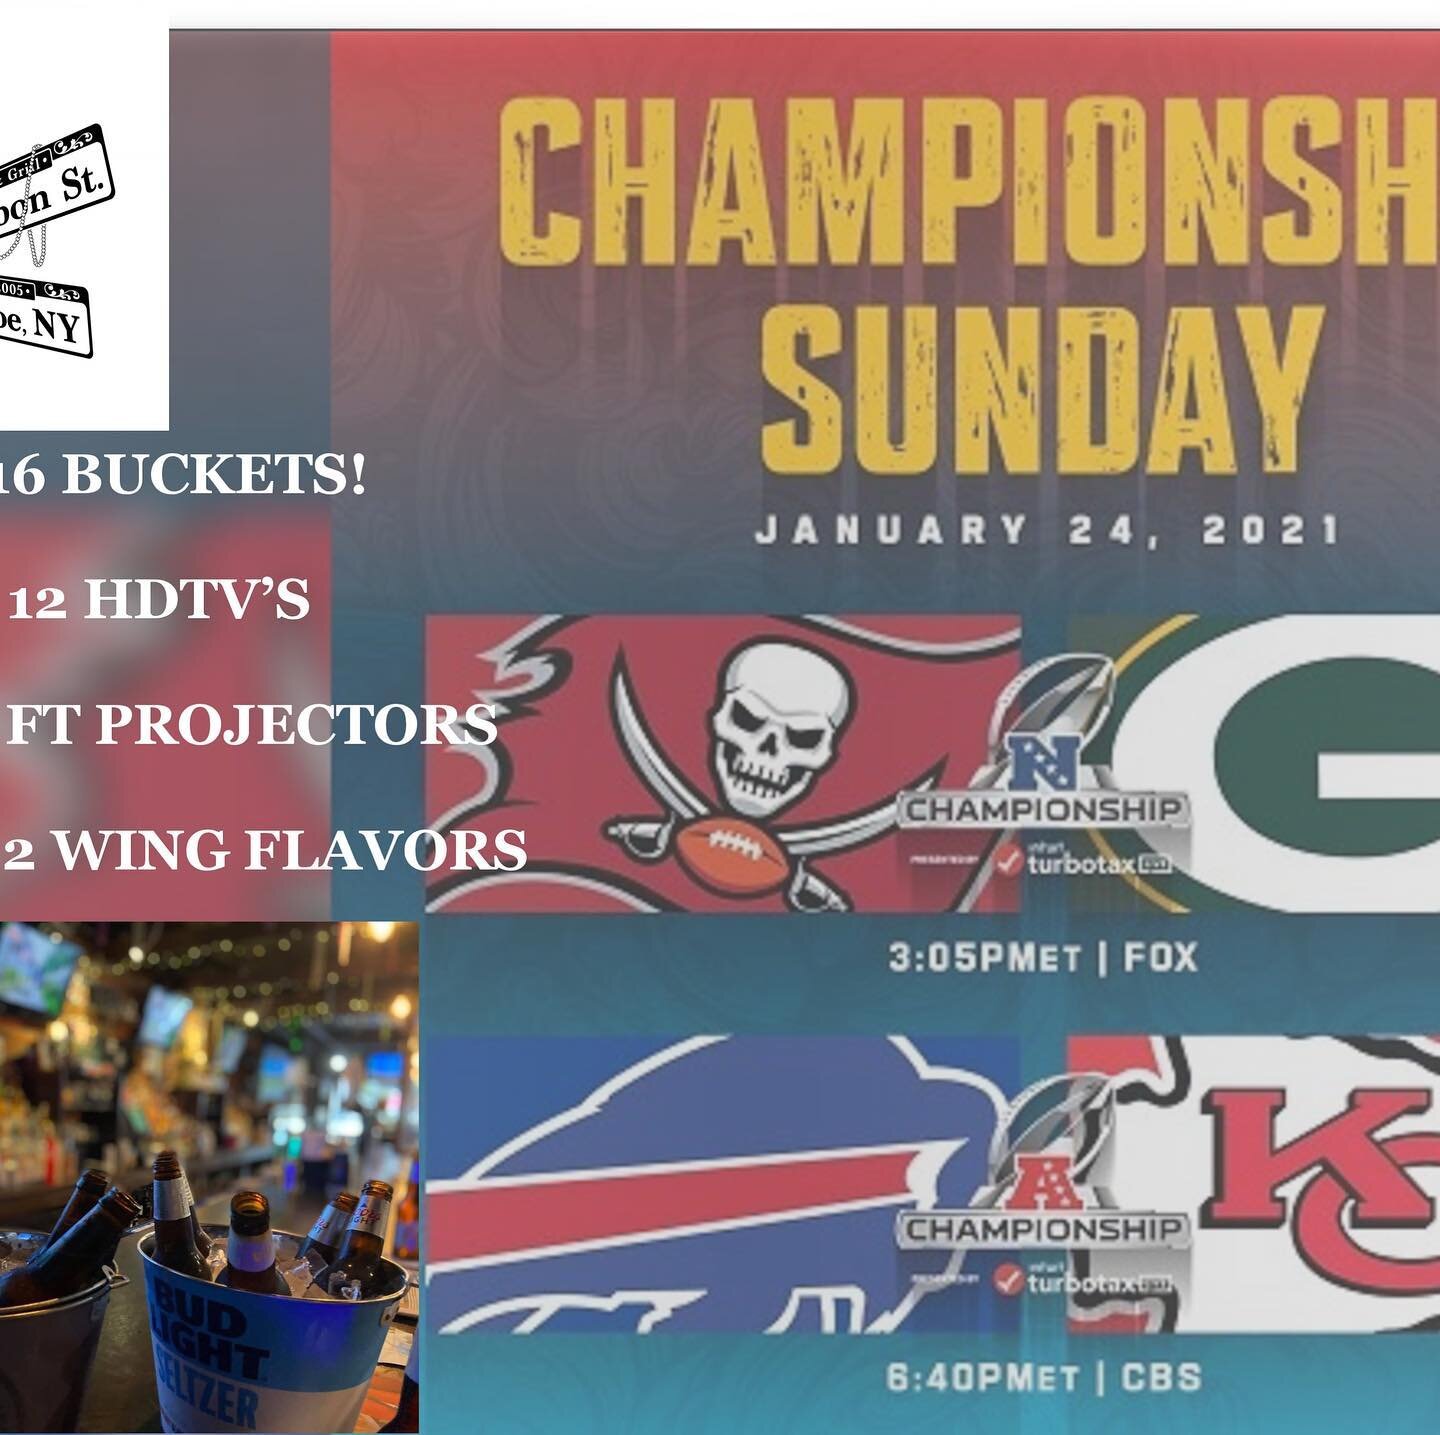 Championship Sunday! Sunday January 24th! Wings! Beer! Football!! One of the funnest days of the football season! Come watch with us! #championshipsunday #wings #bucketsofbeer #bstreetbarandgrill